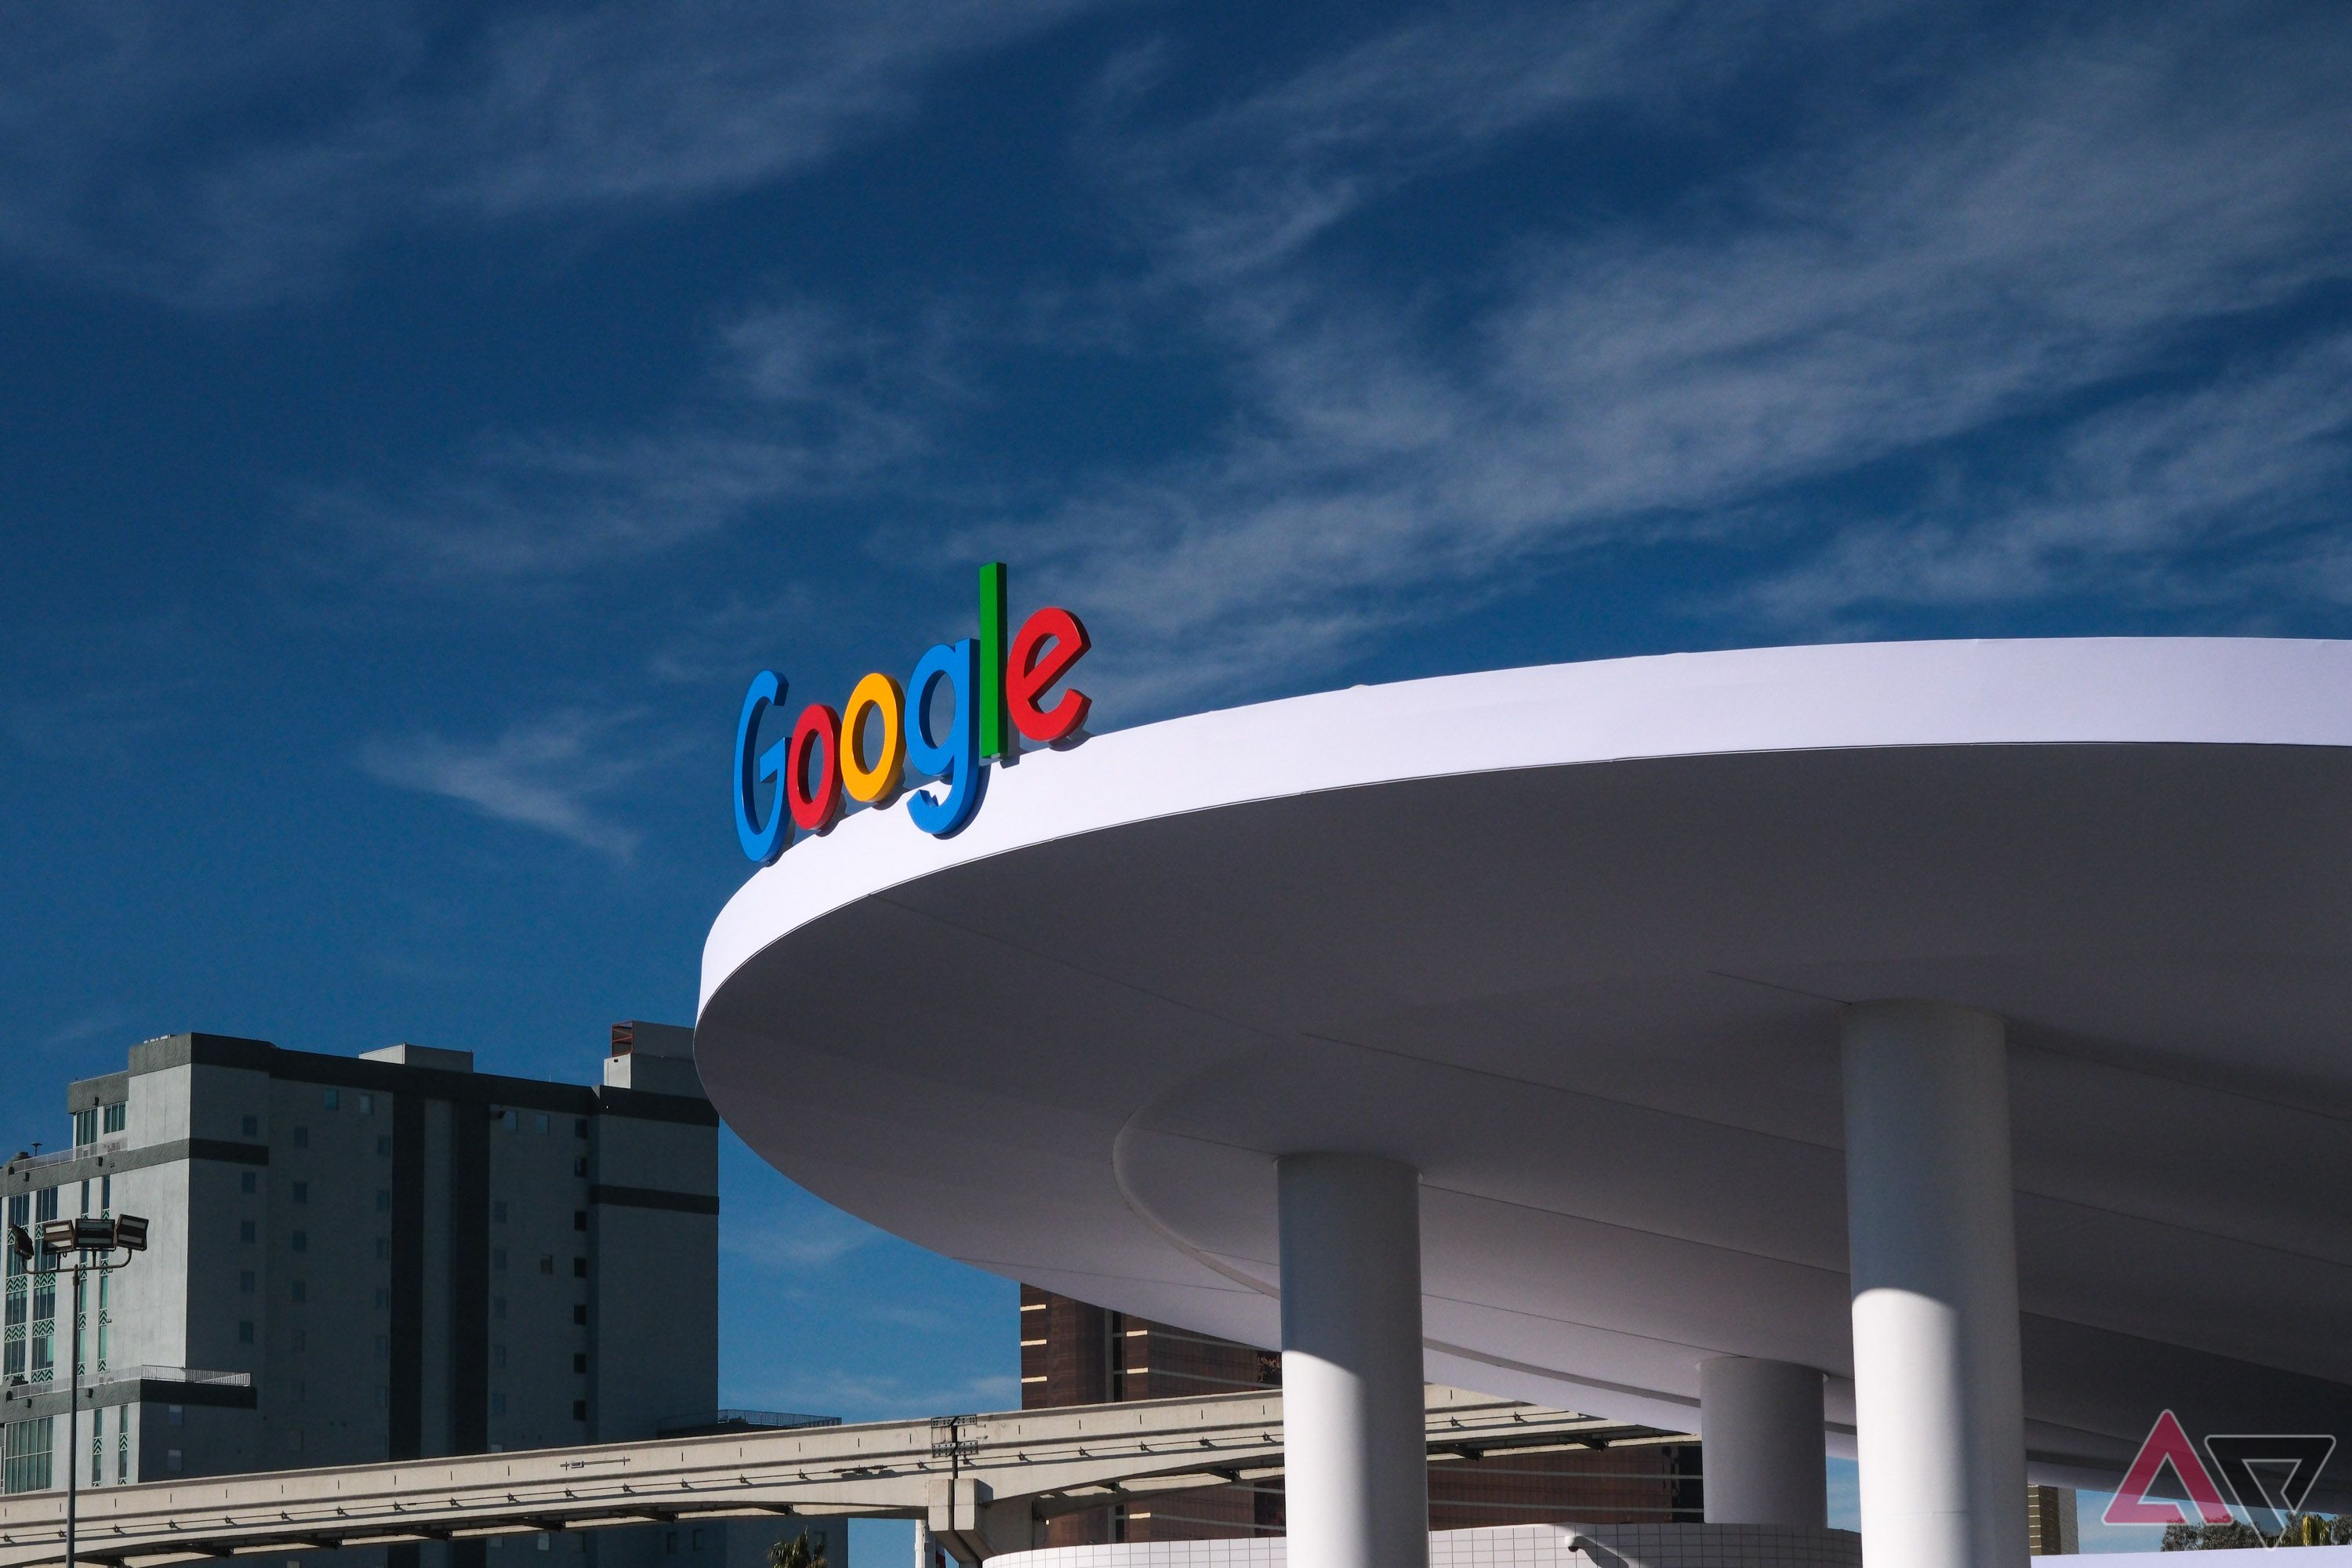 Do you believe Google services are here to stay?